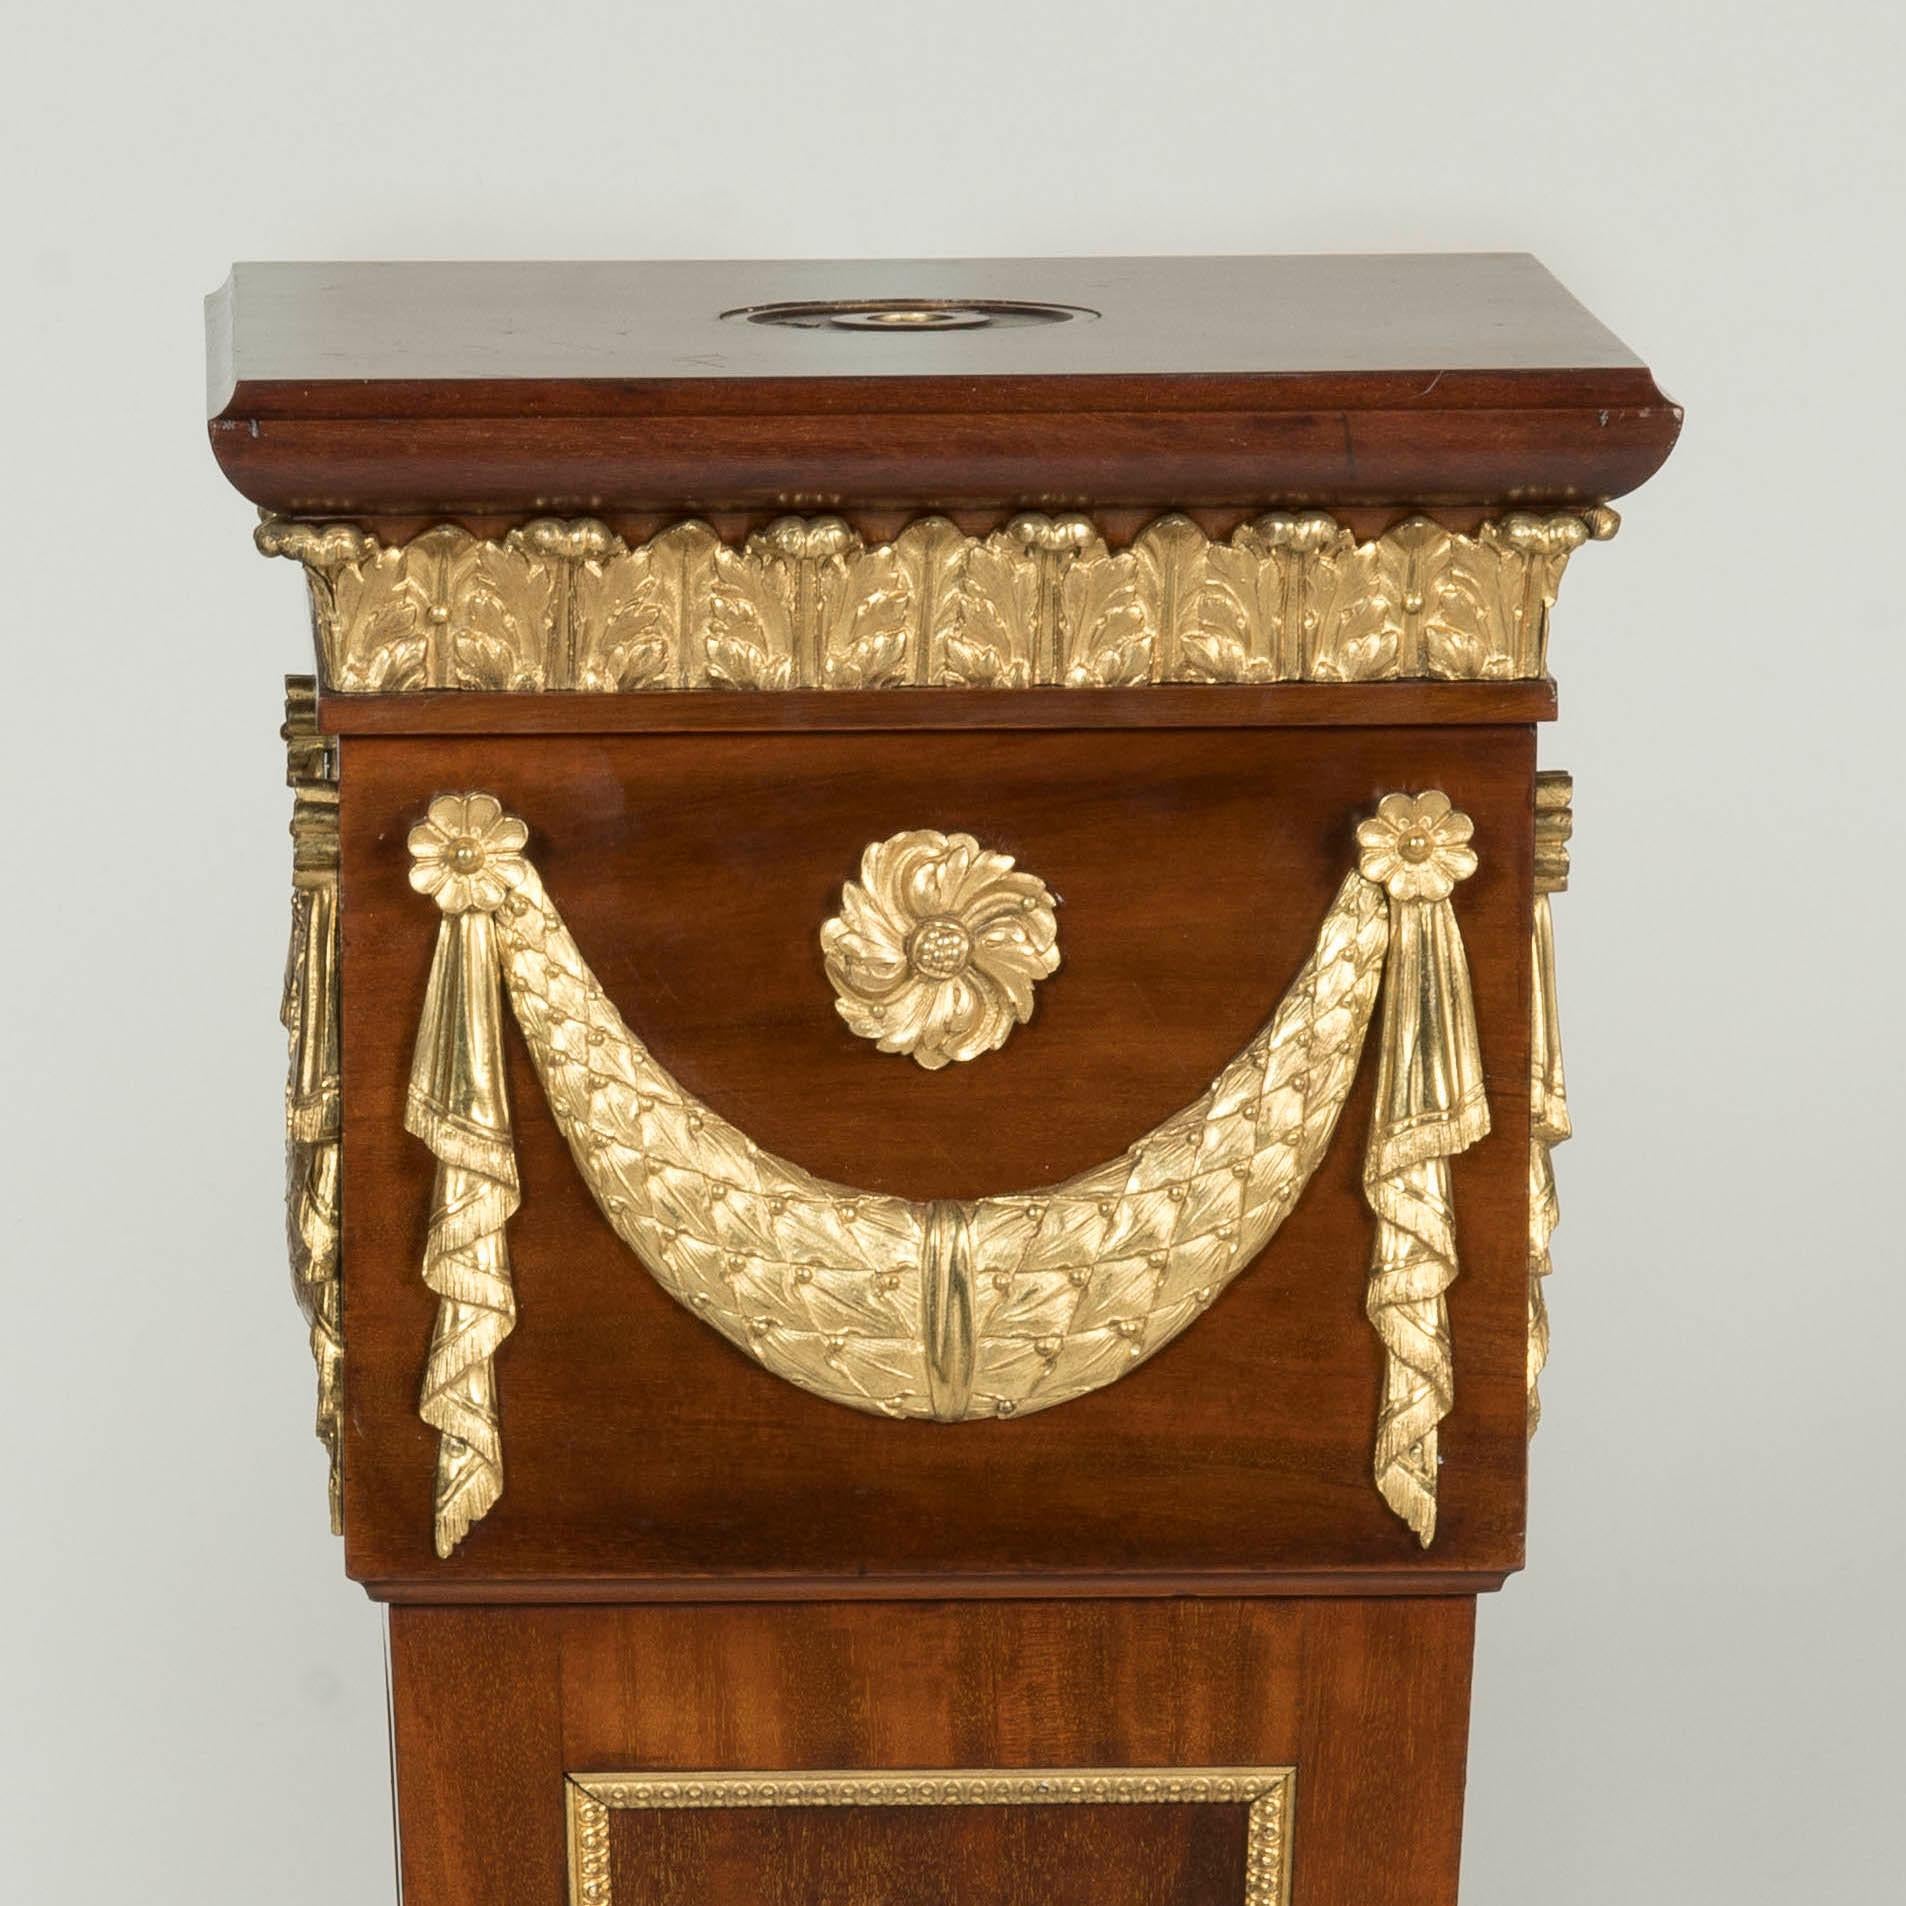 19th Century Pair of English Ormolu-Mounted Mahogany Pedestals by Trollope In Good Condition For Sale In London, GB